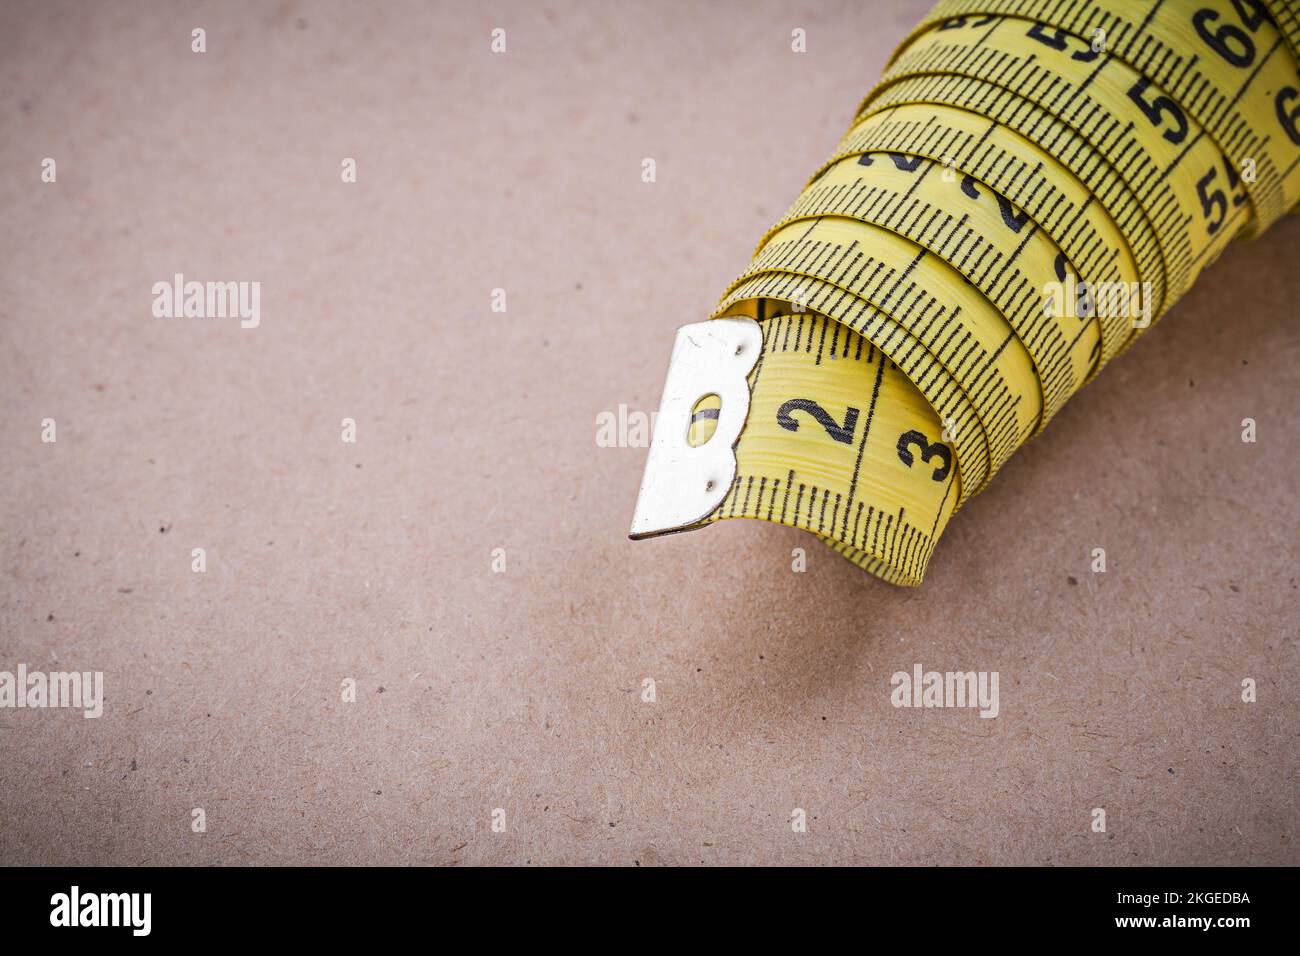 103 Flexible Measuring Tape Stock Photos, High-Res Pictures, and Images -  Getty Images